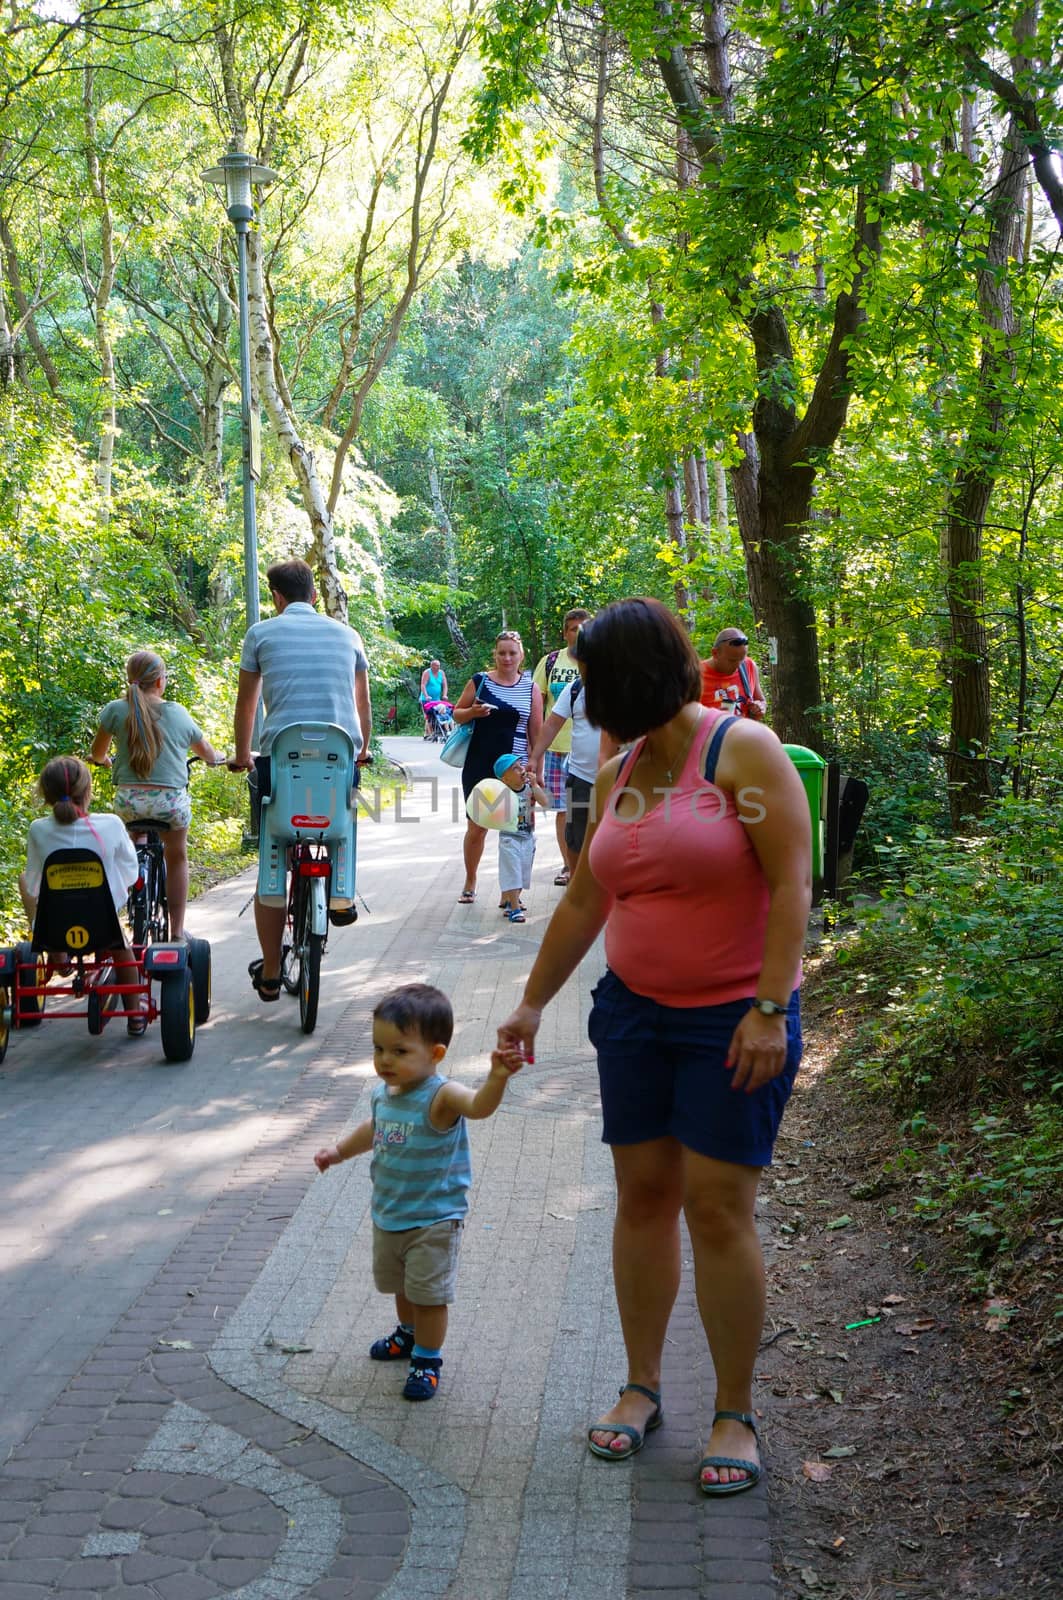 SIANOZETY, POLAND - JULY 22, 2015: Woman and child walking on a park footpath